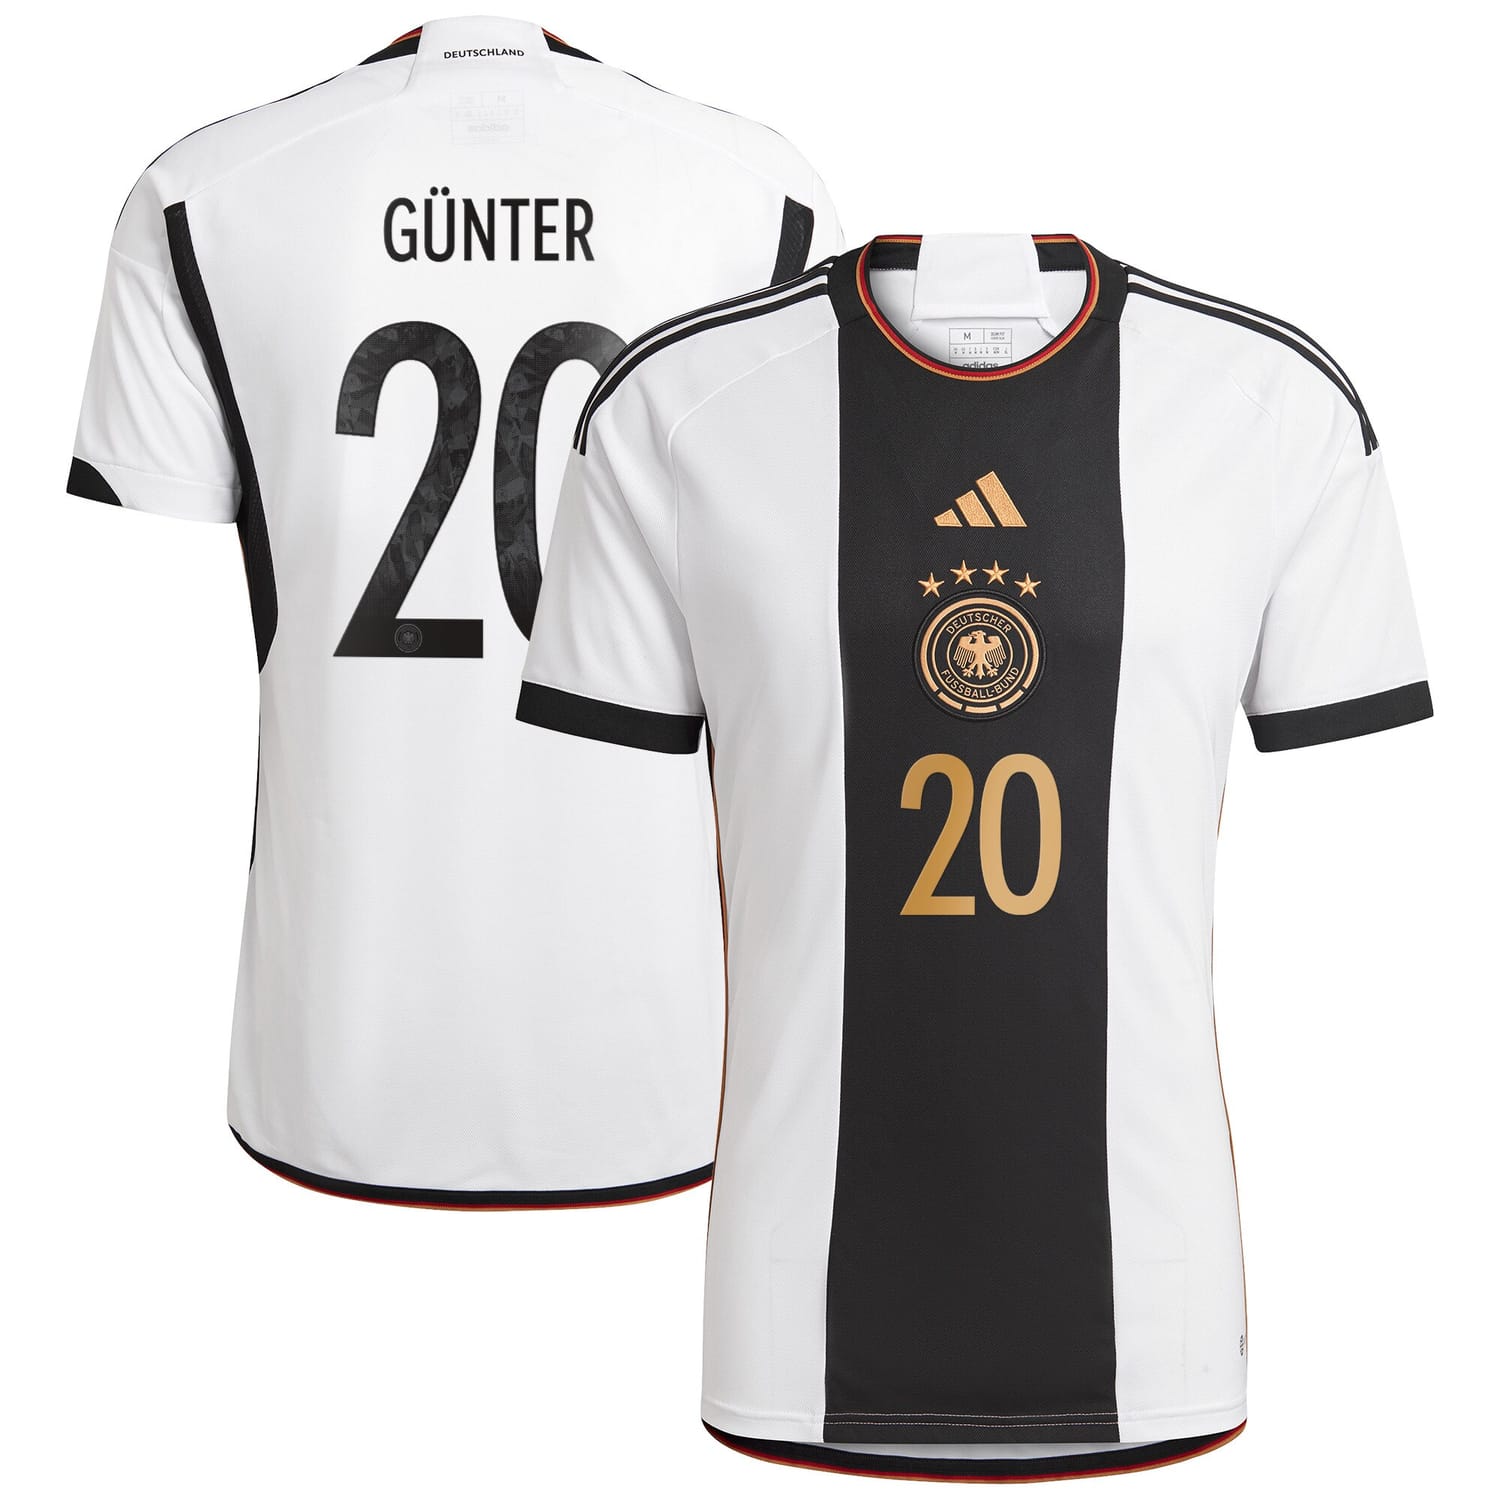 Germany National Team Home Jersey Shirt 2022 player Christian Günter 20 printing for Men